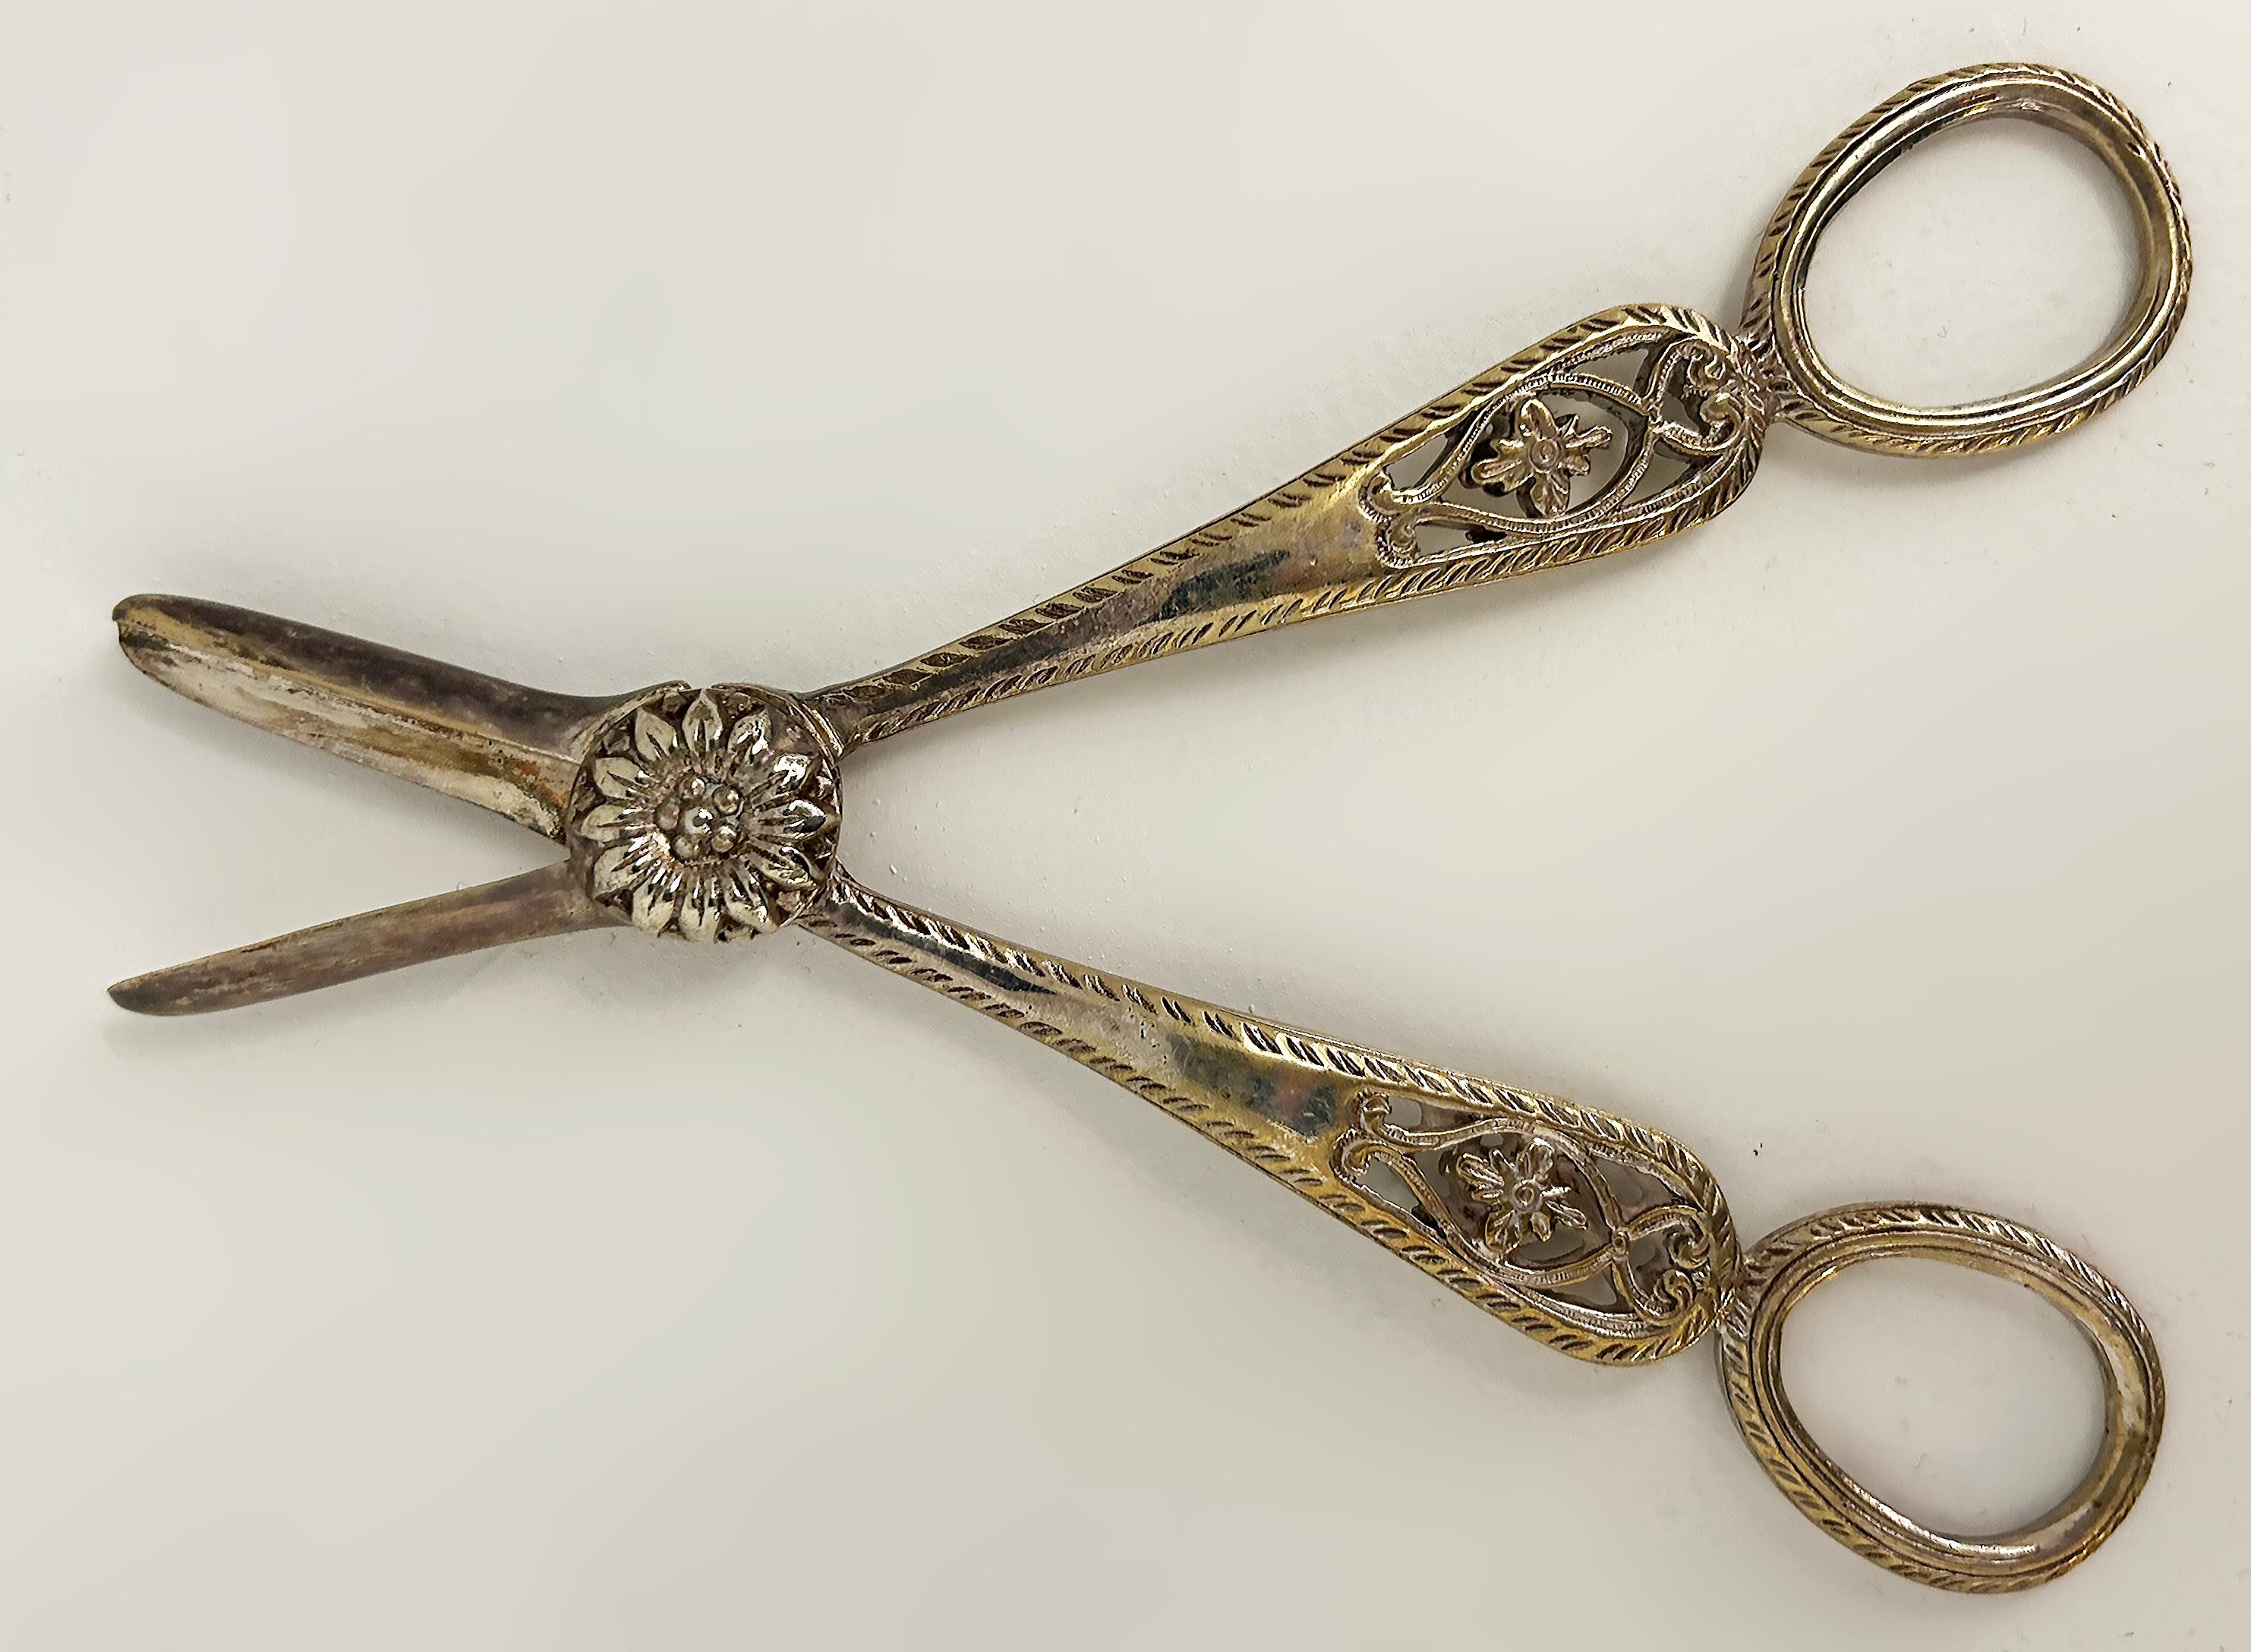 Antique Silver Plate Grape Scissors, Floral and Filigree Details

Offered for sale is a pair of antique silver-plated grape scissors with ornate floral and filigree decorations and details. The scissors have a lovely aged patina.